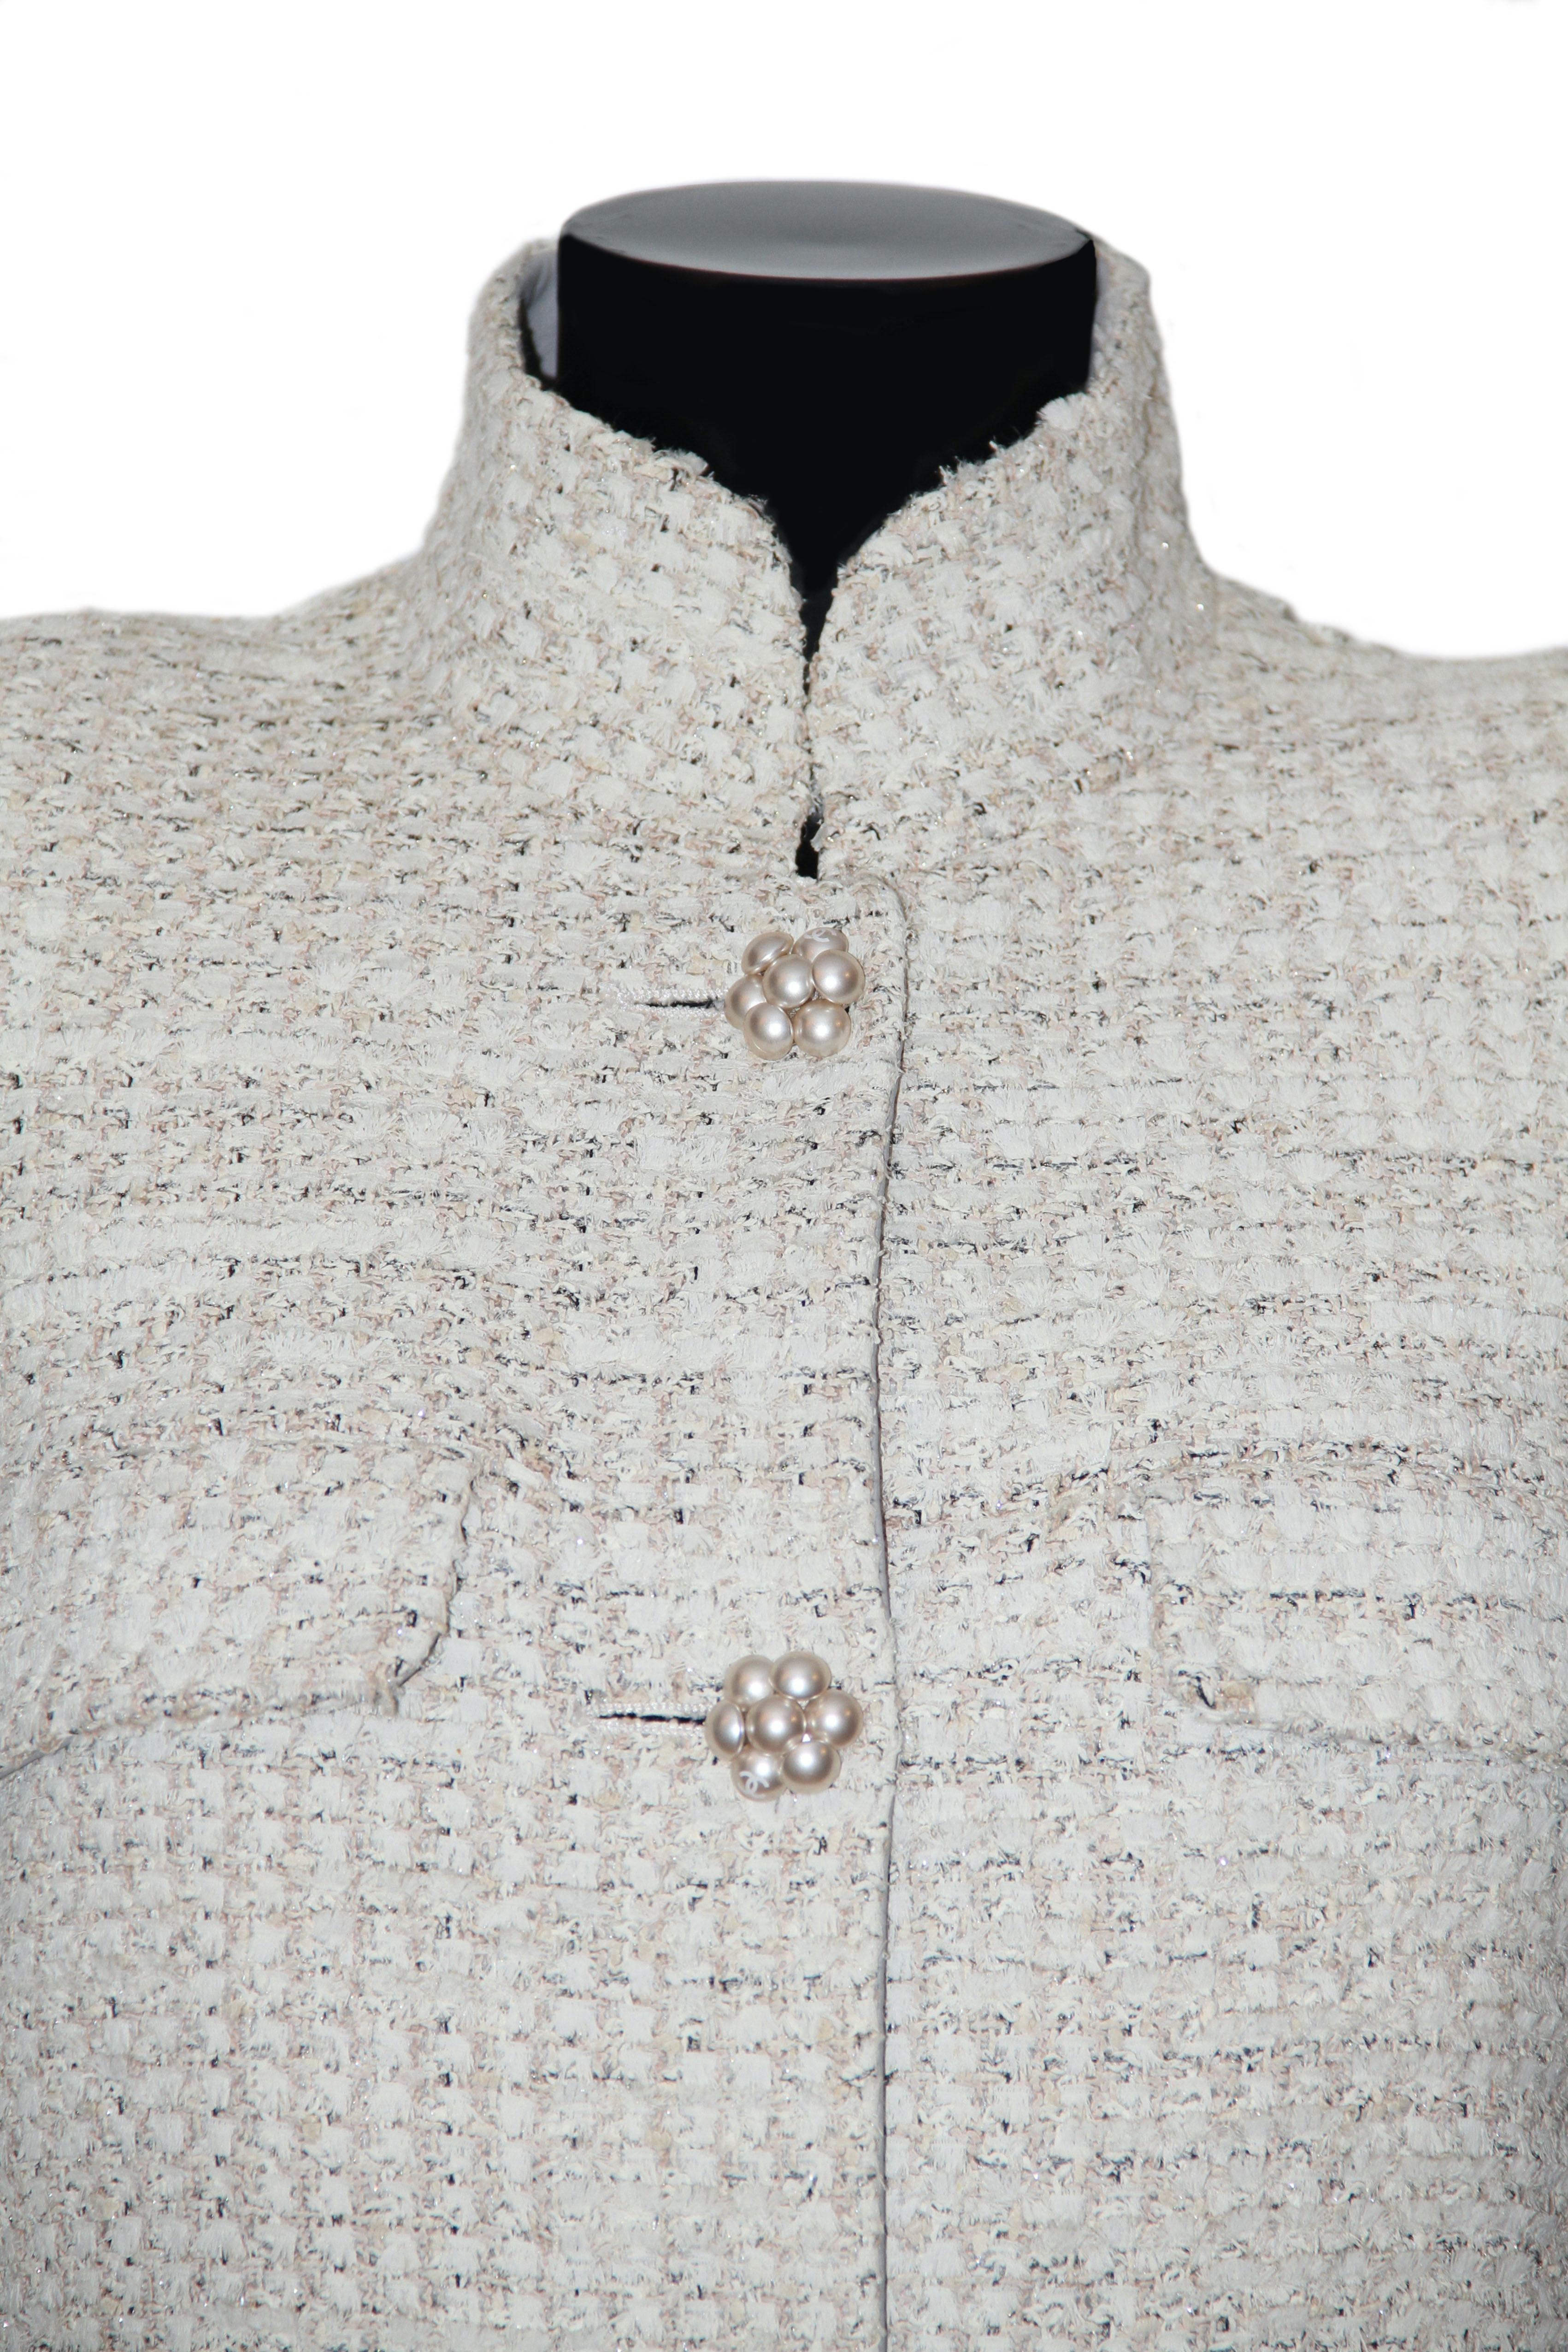 Women's Chanel Ivory Runway Spring 2014 Collection Lesage Tweed Leather Trim Dress